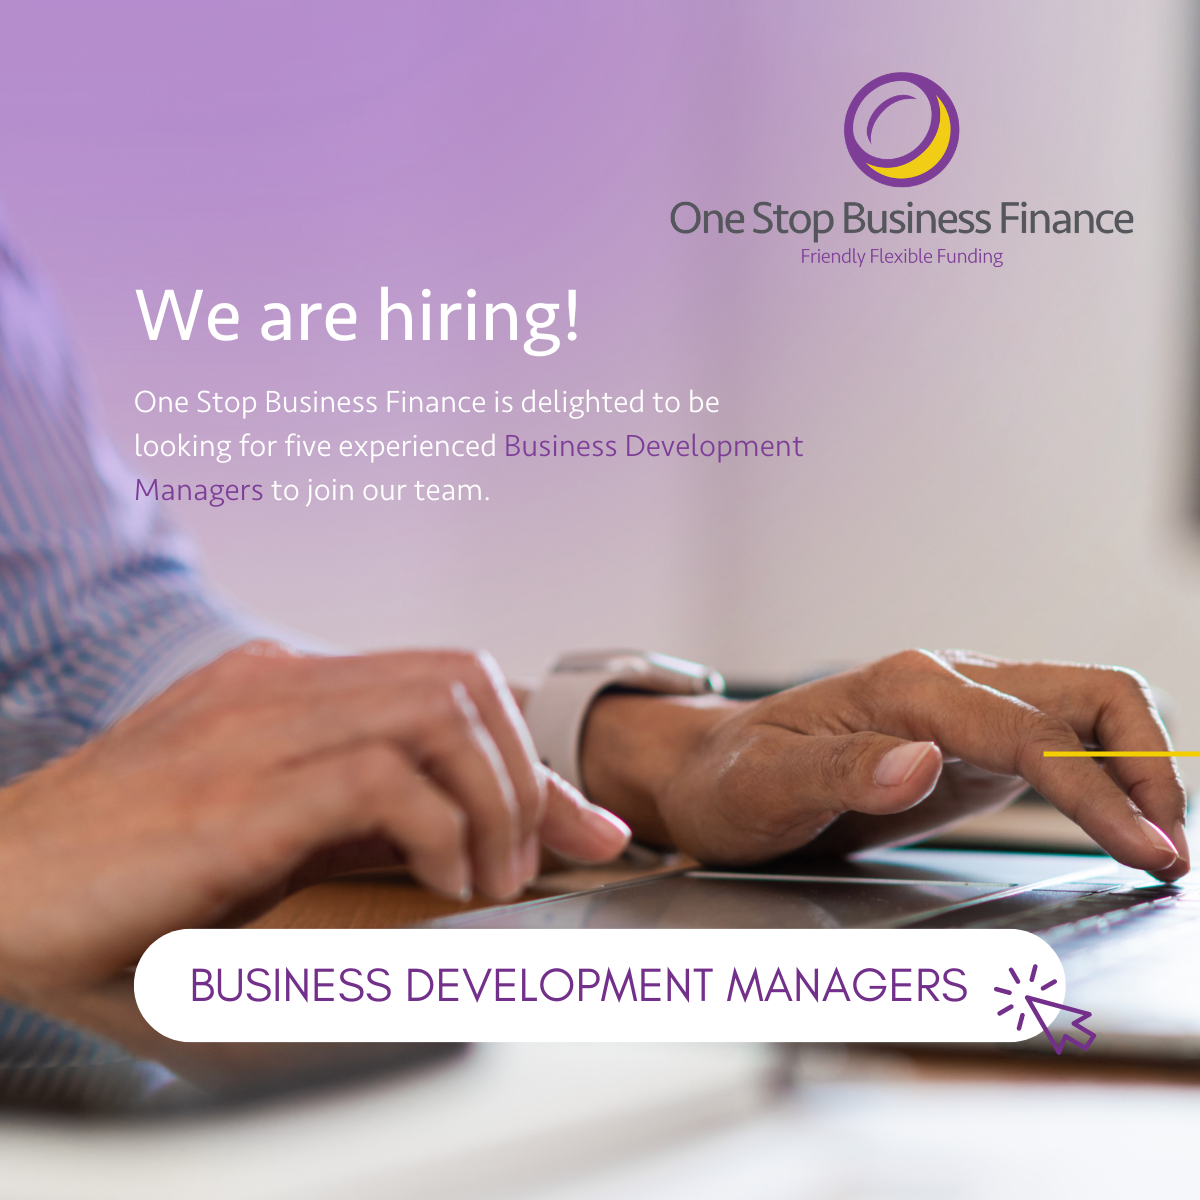 We're hiring! We're on the hunt for five Business Development Managers